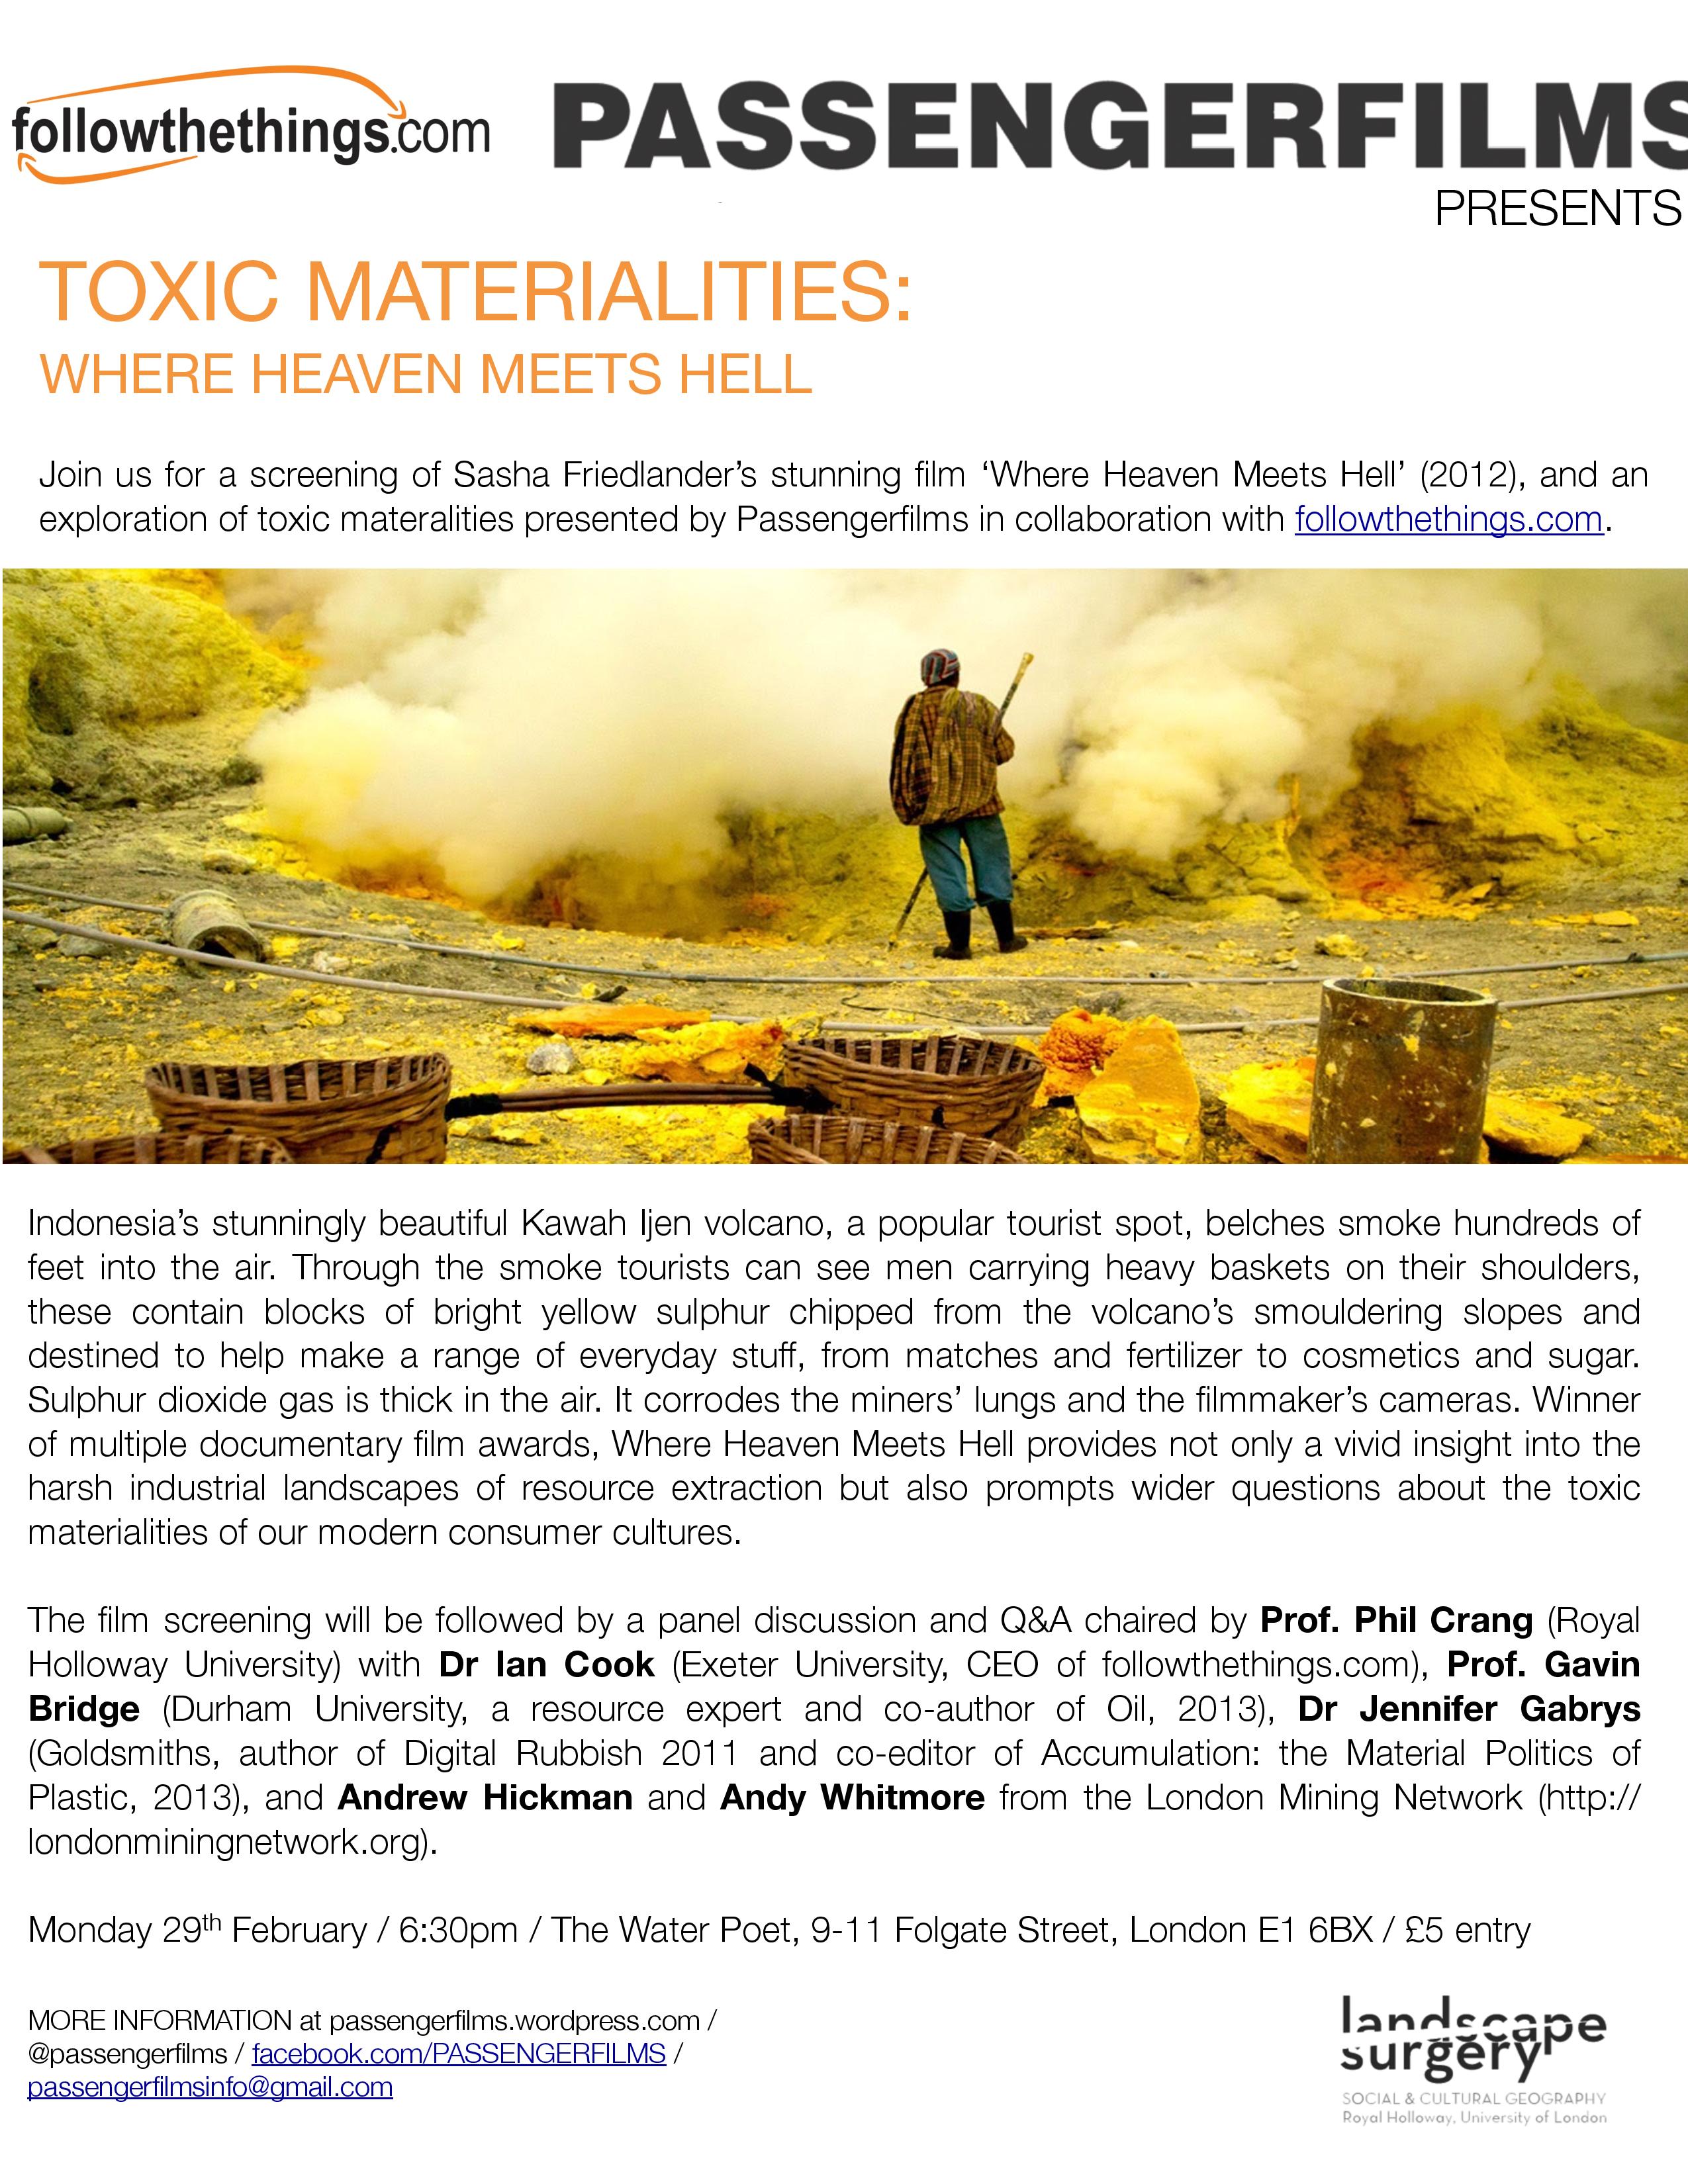 Upcoming Event: TOXIC MATERIALITIES – Where Heaven Meets Hell